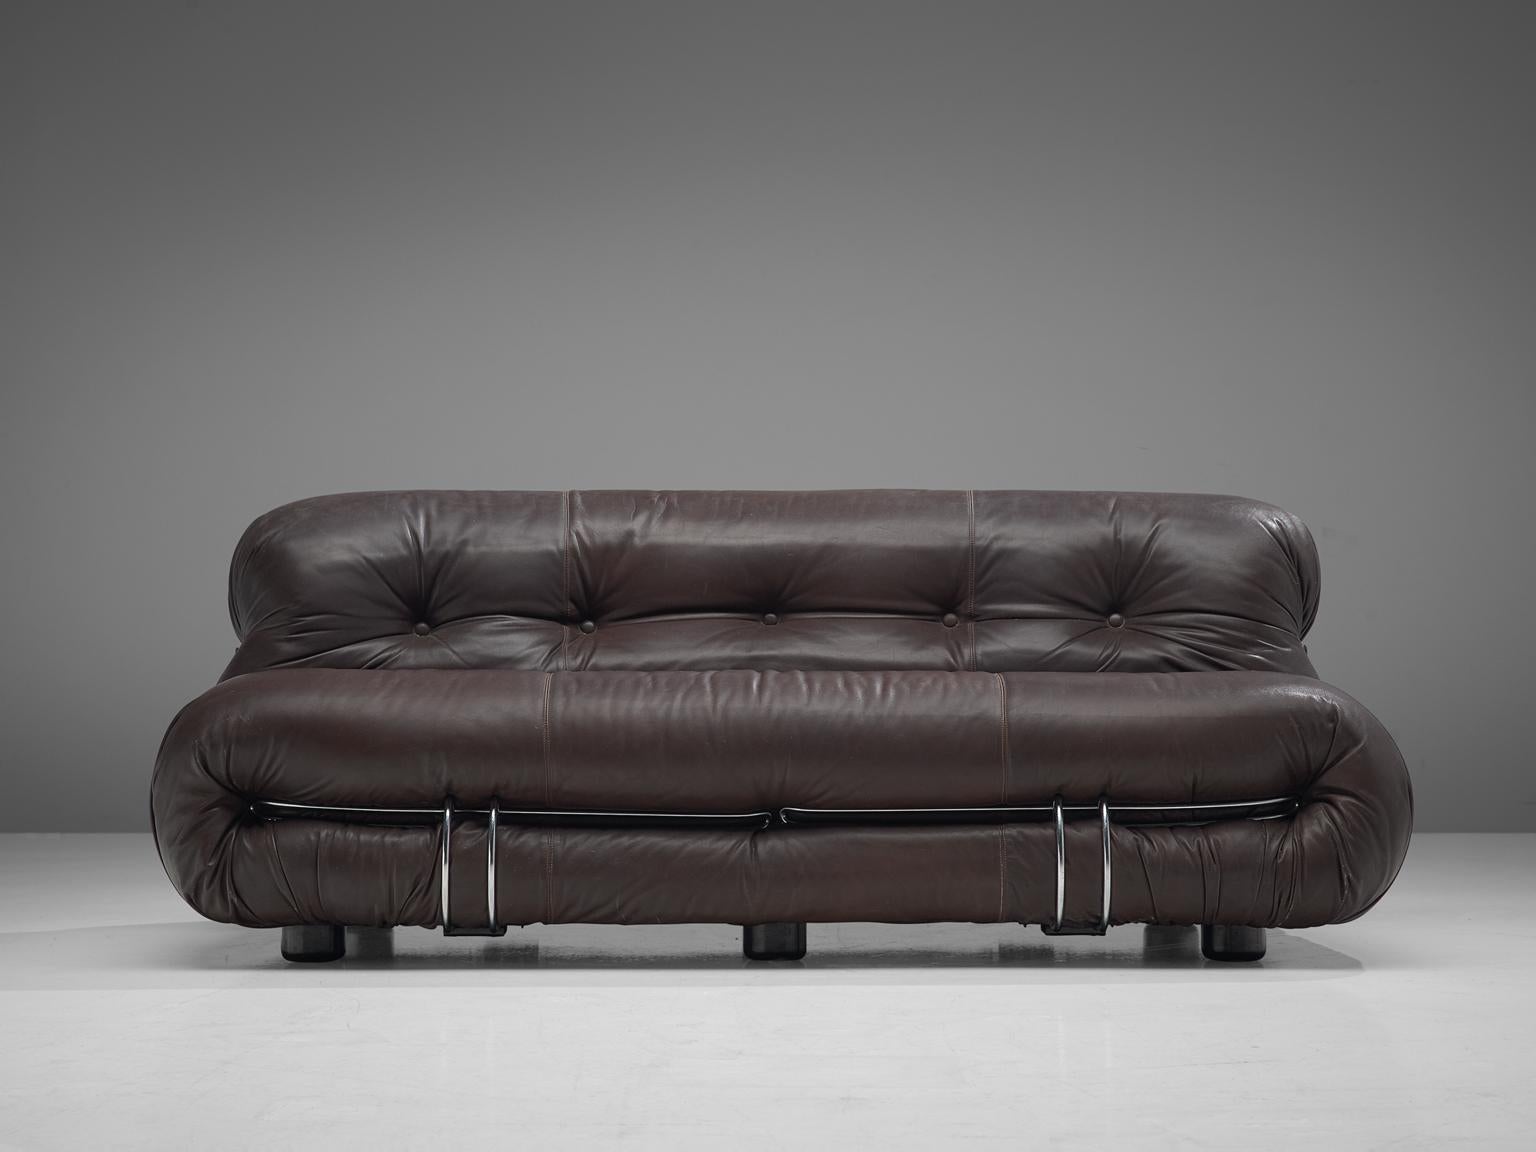 'Soriana' sofa, leather and metal, by Afra & Tobia Scarpa for Cassina, Italy, 1969. 

Iconic sofa by Italian designer couple Afra & Tobia Scarpa, the Soriana proposes a model that institutionalizes the image of the informal sitting where